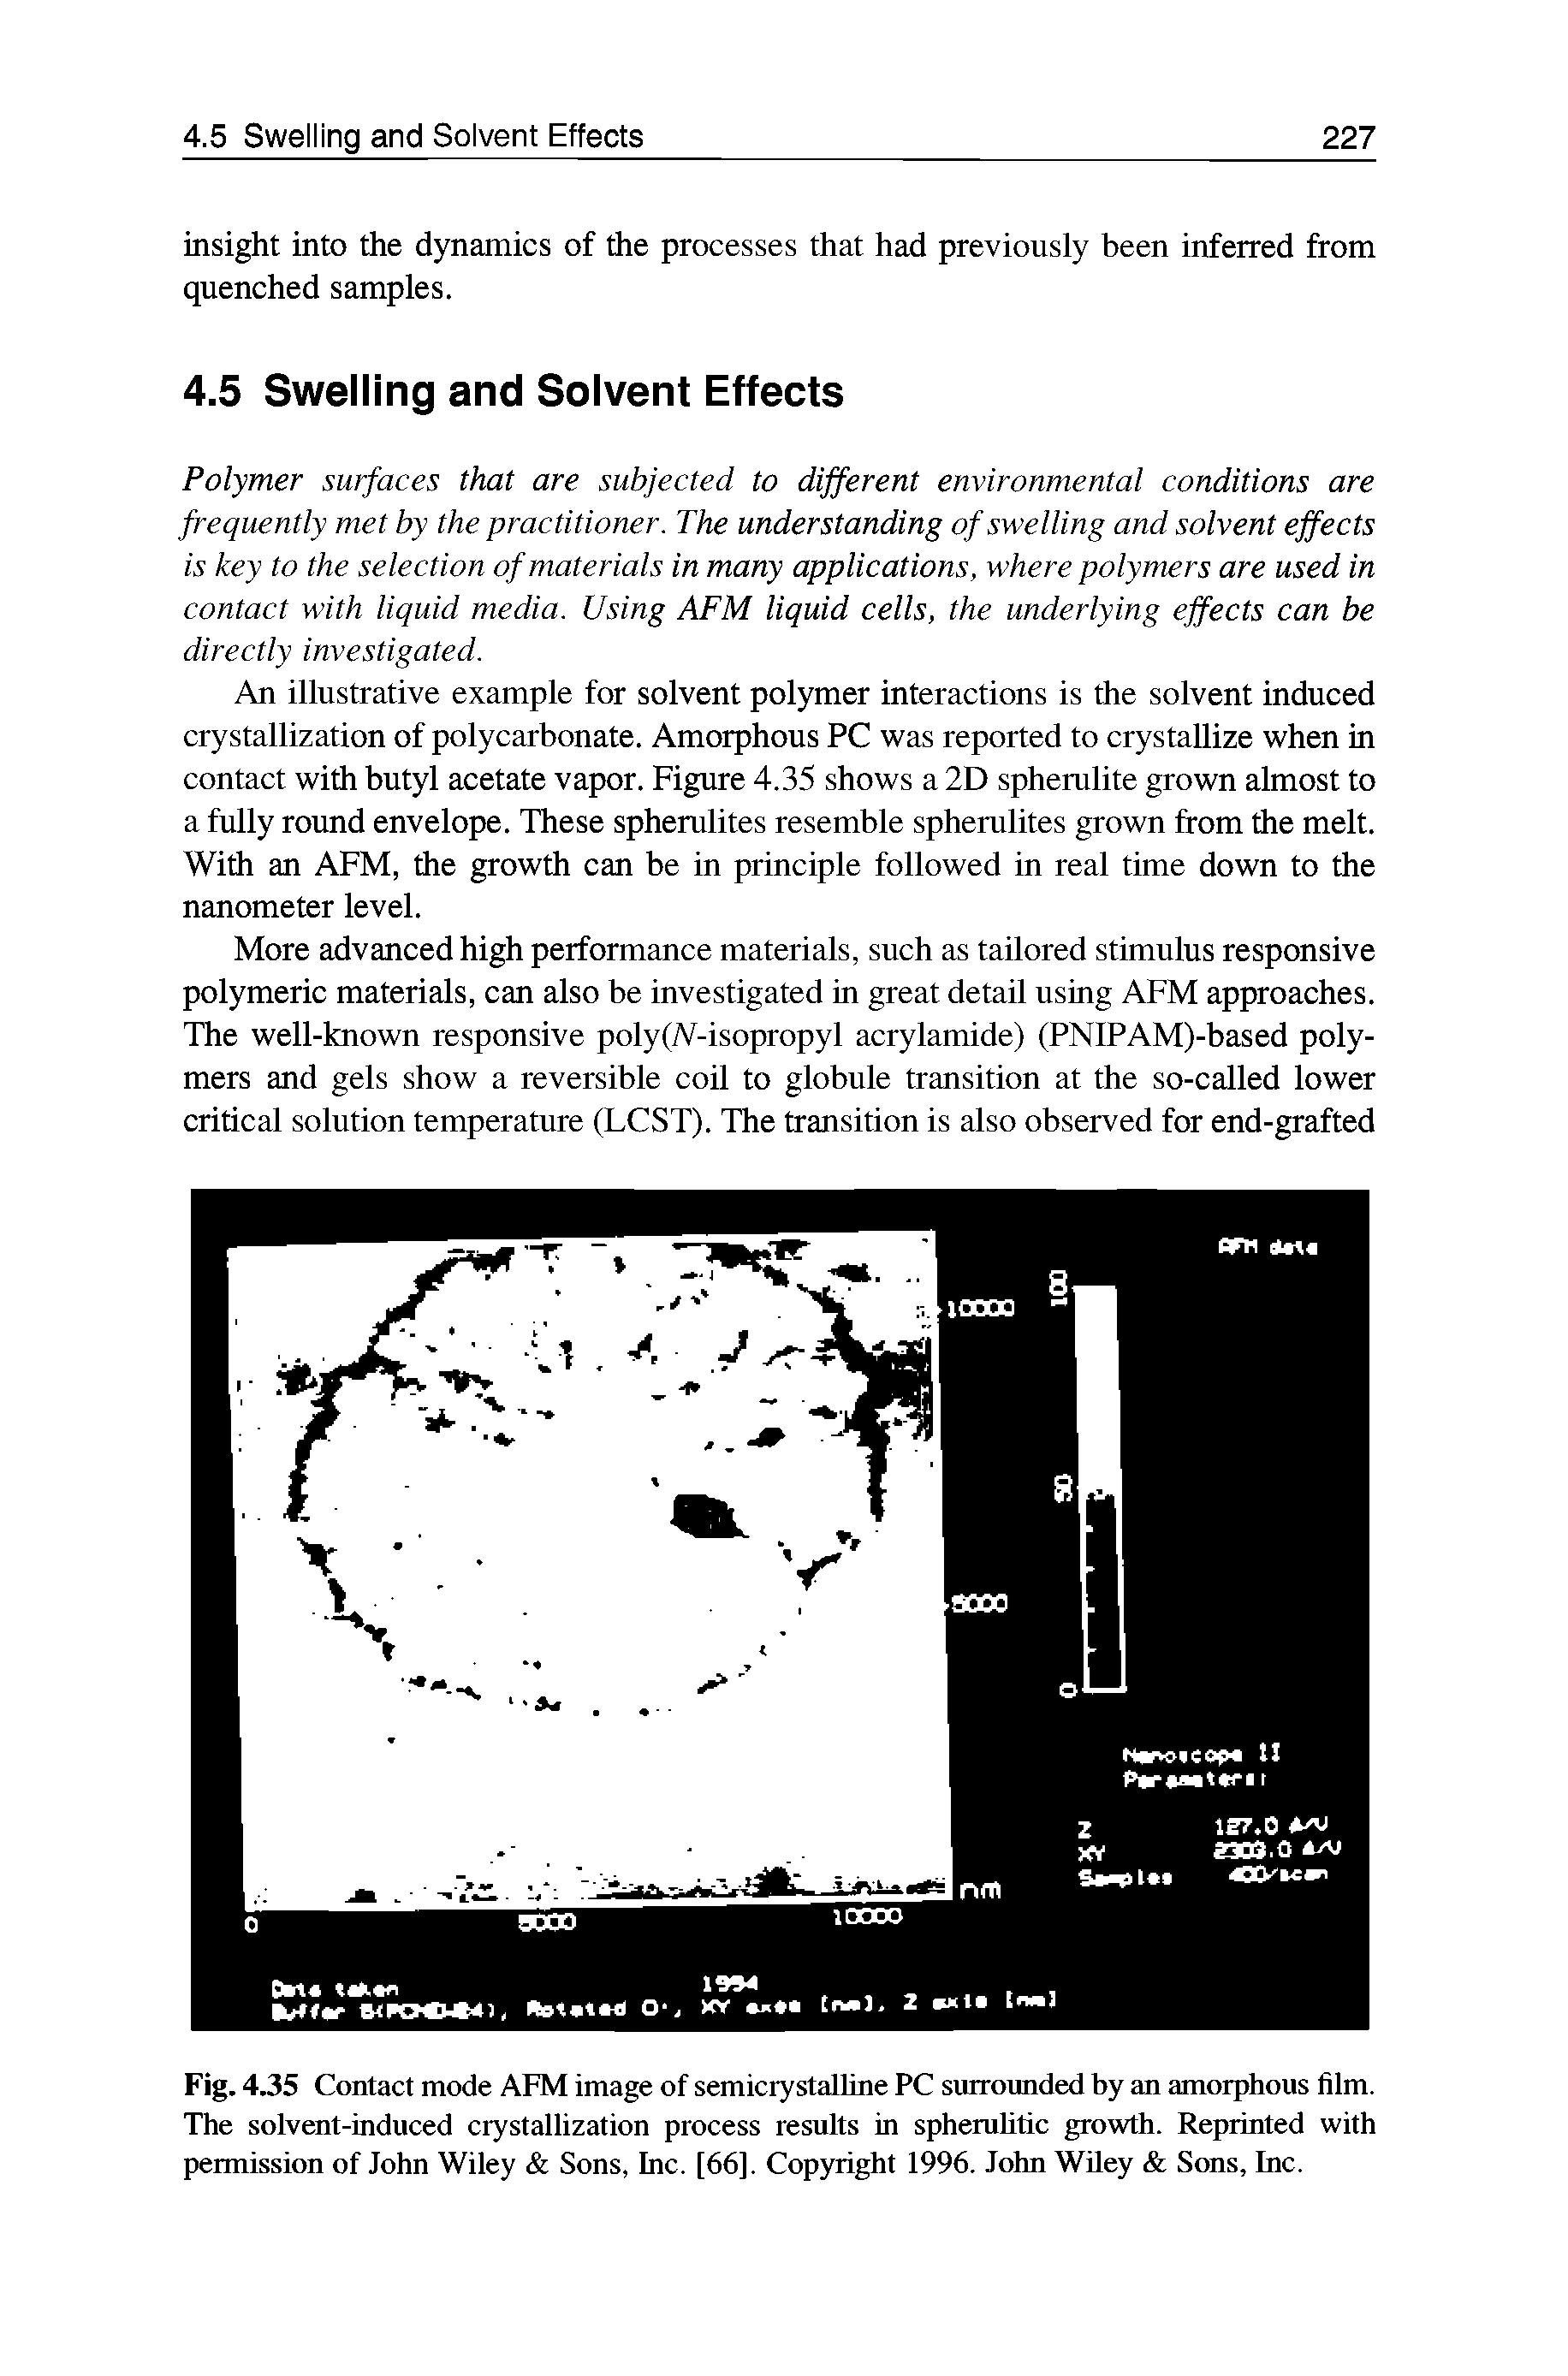 Fig. 4.35 Contact mode AFM image of semicrystalline PC surrounded by an amorphous film. The solvent-induced crystallization process results in spherulitic growth. Reprinted with permission of John Wiley Sons, Inc. [66]. Copyright 1996. John Wiley Sons, Inc.